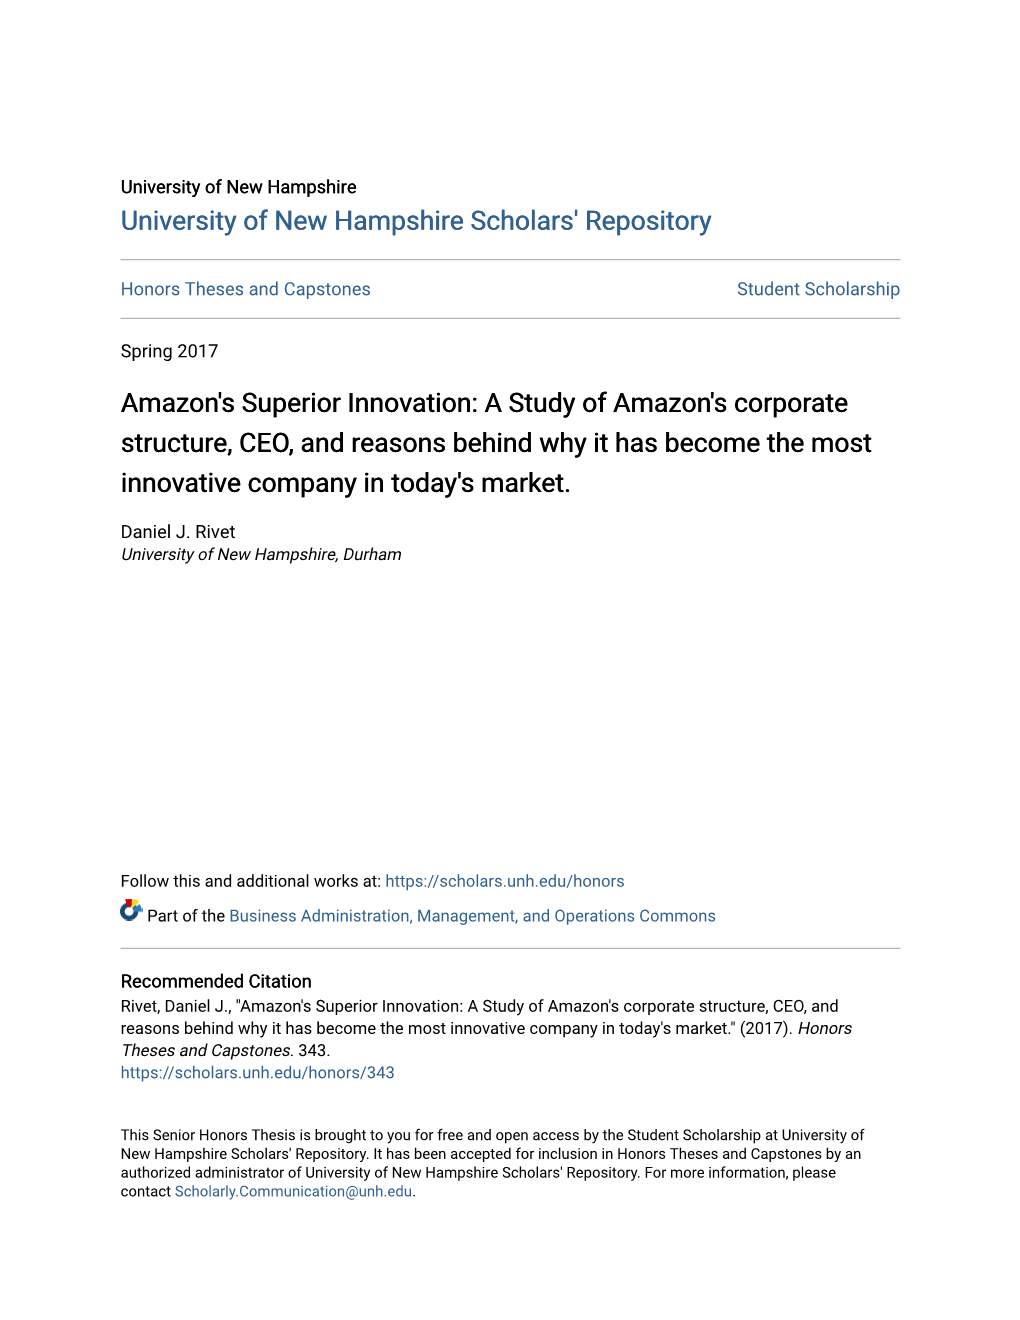 Amazon's Superior Innovation: a Study of Amazon's Corporate Structure, CEO, and Reasons Behind Why It Has Become the Most Innovative Company in Today's Market